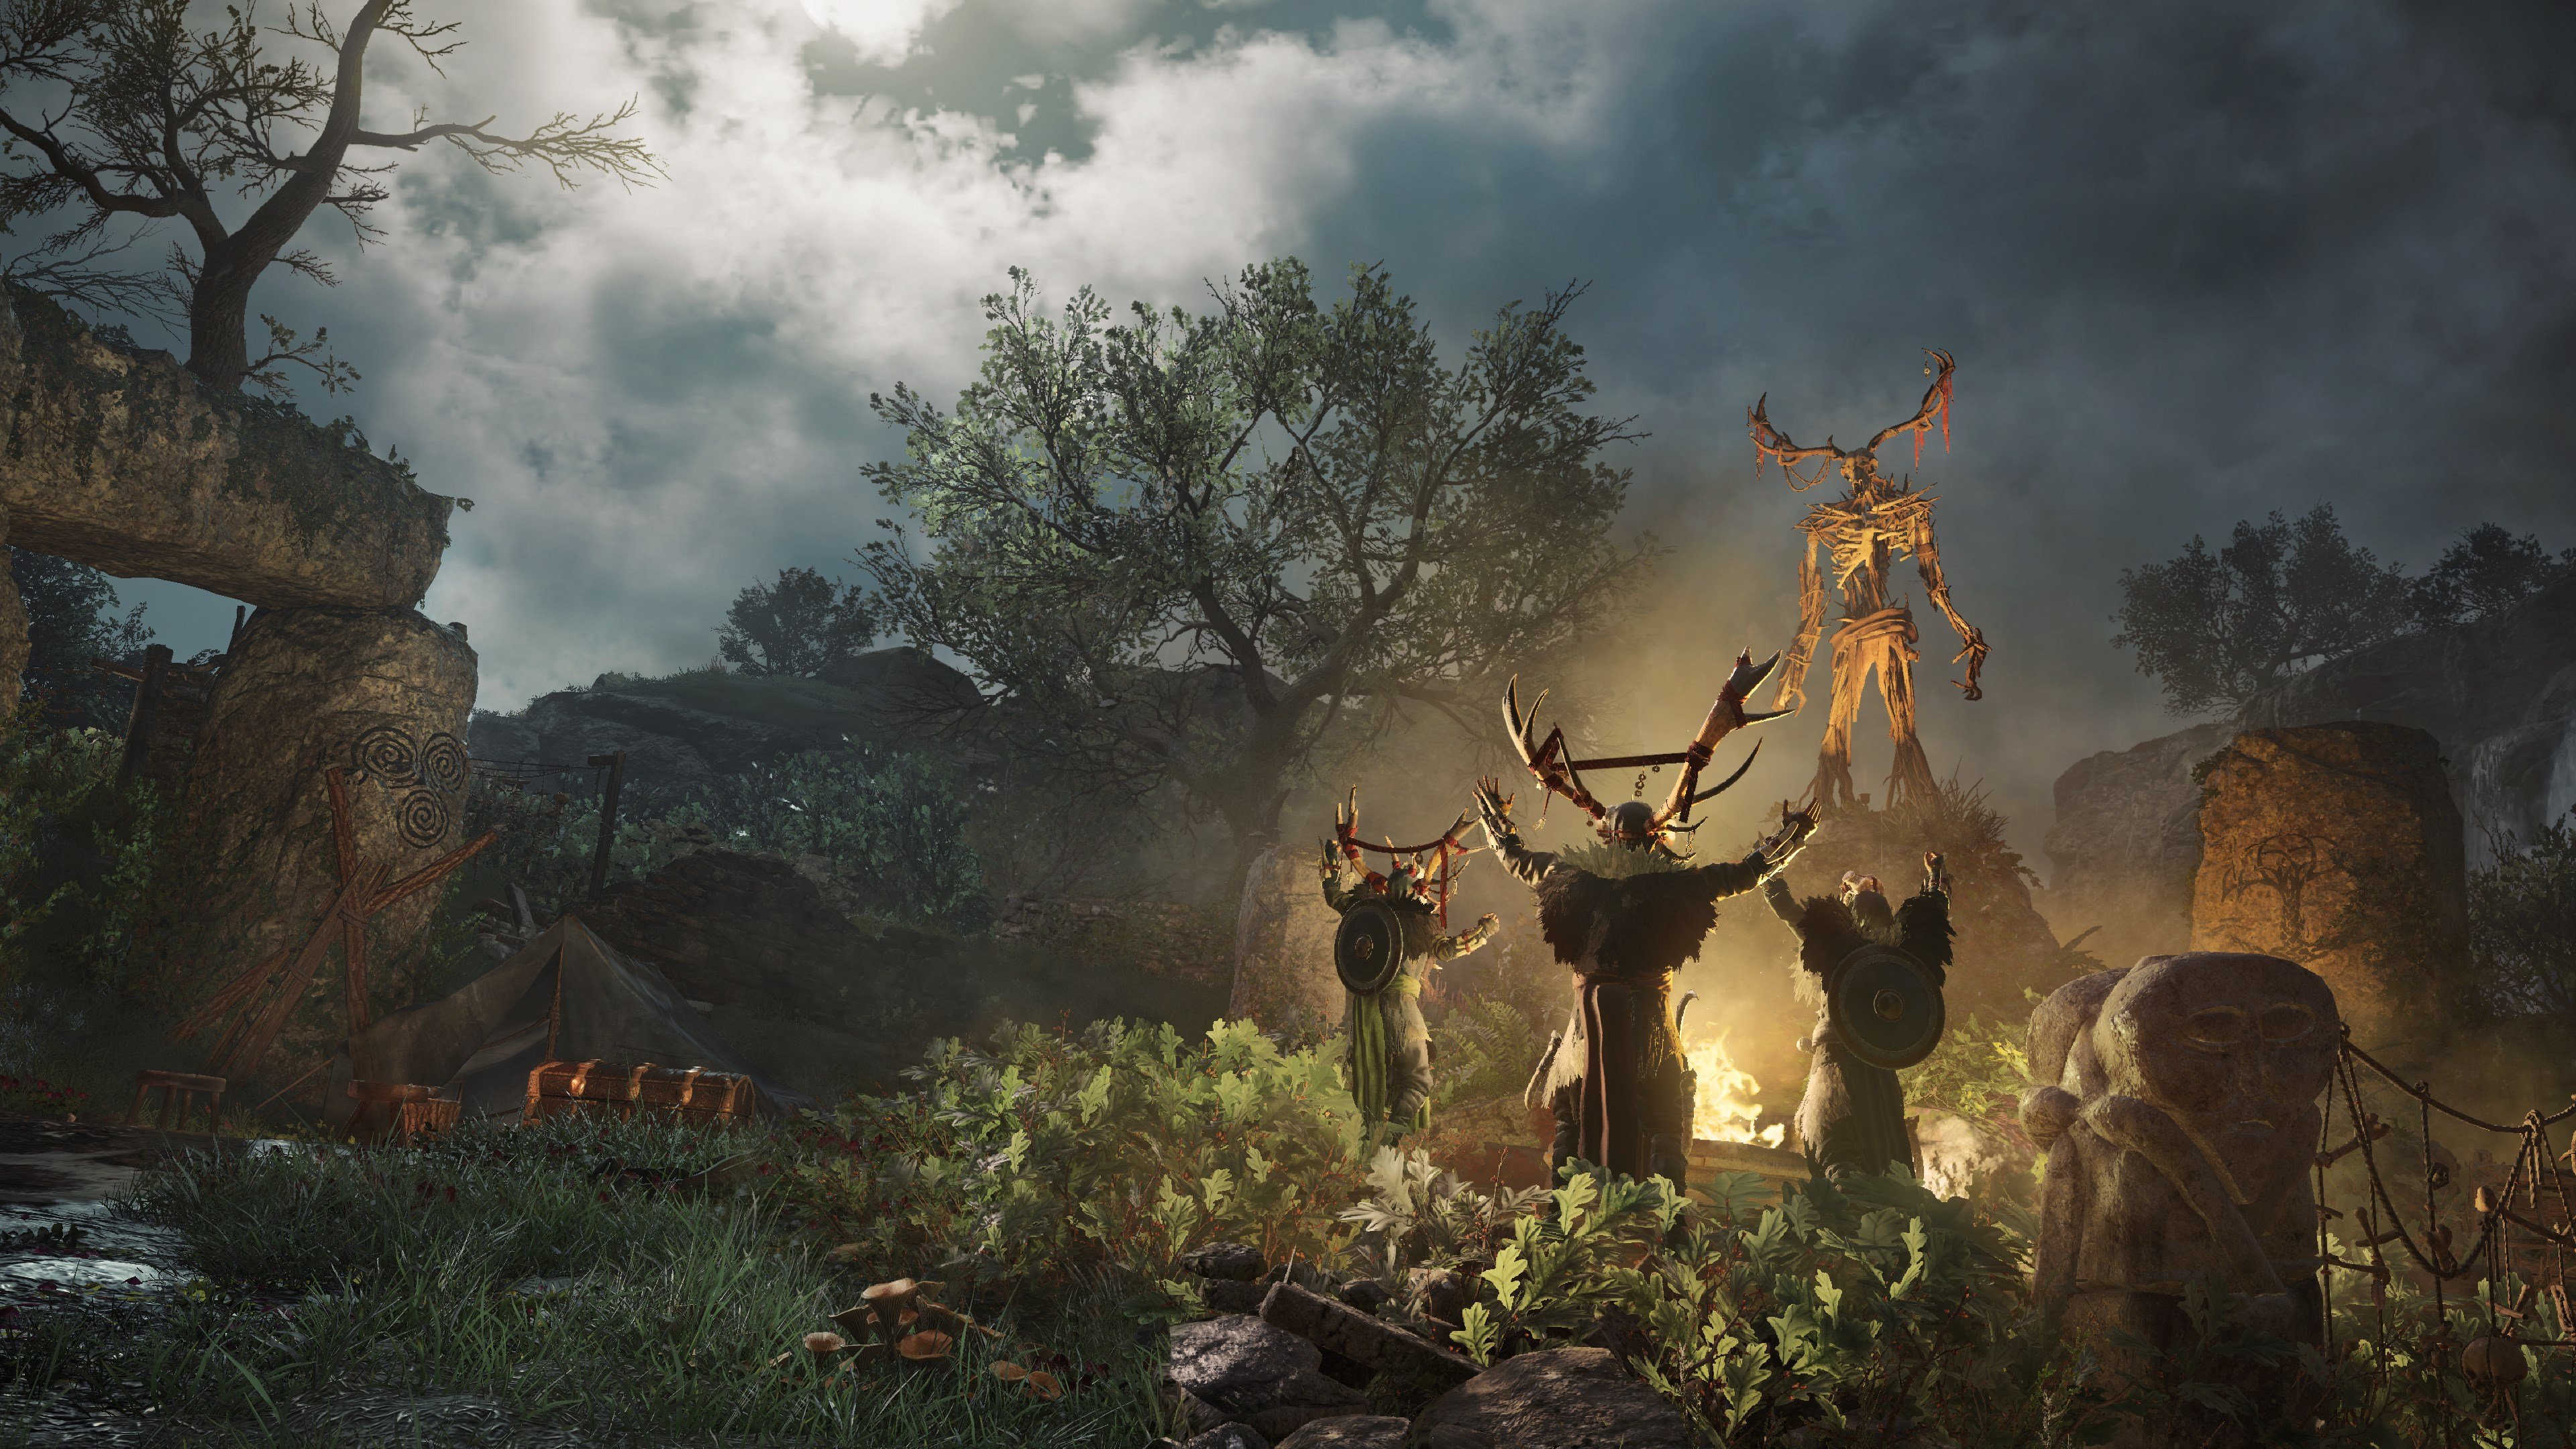 New Assassin S Creed Valhalla Wrath Of The Druids Screenshots Show A Werewolf Push Square